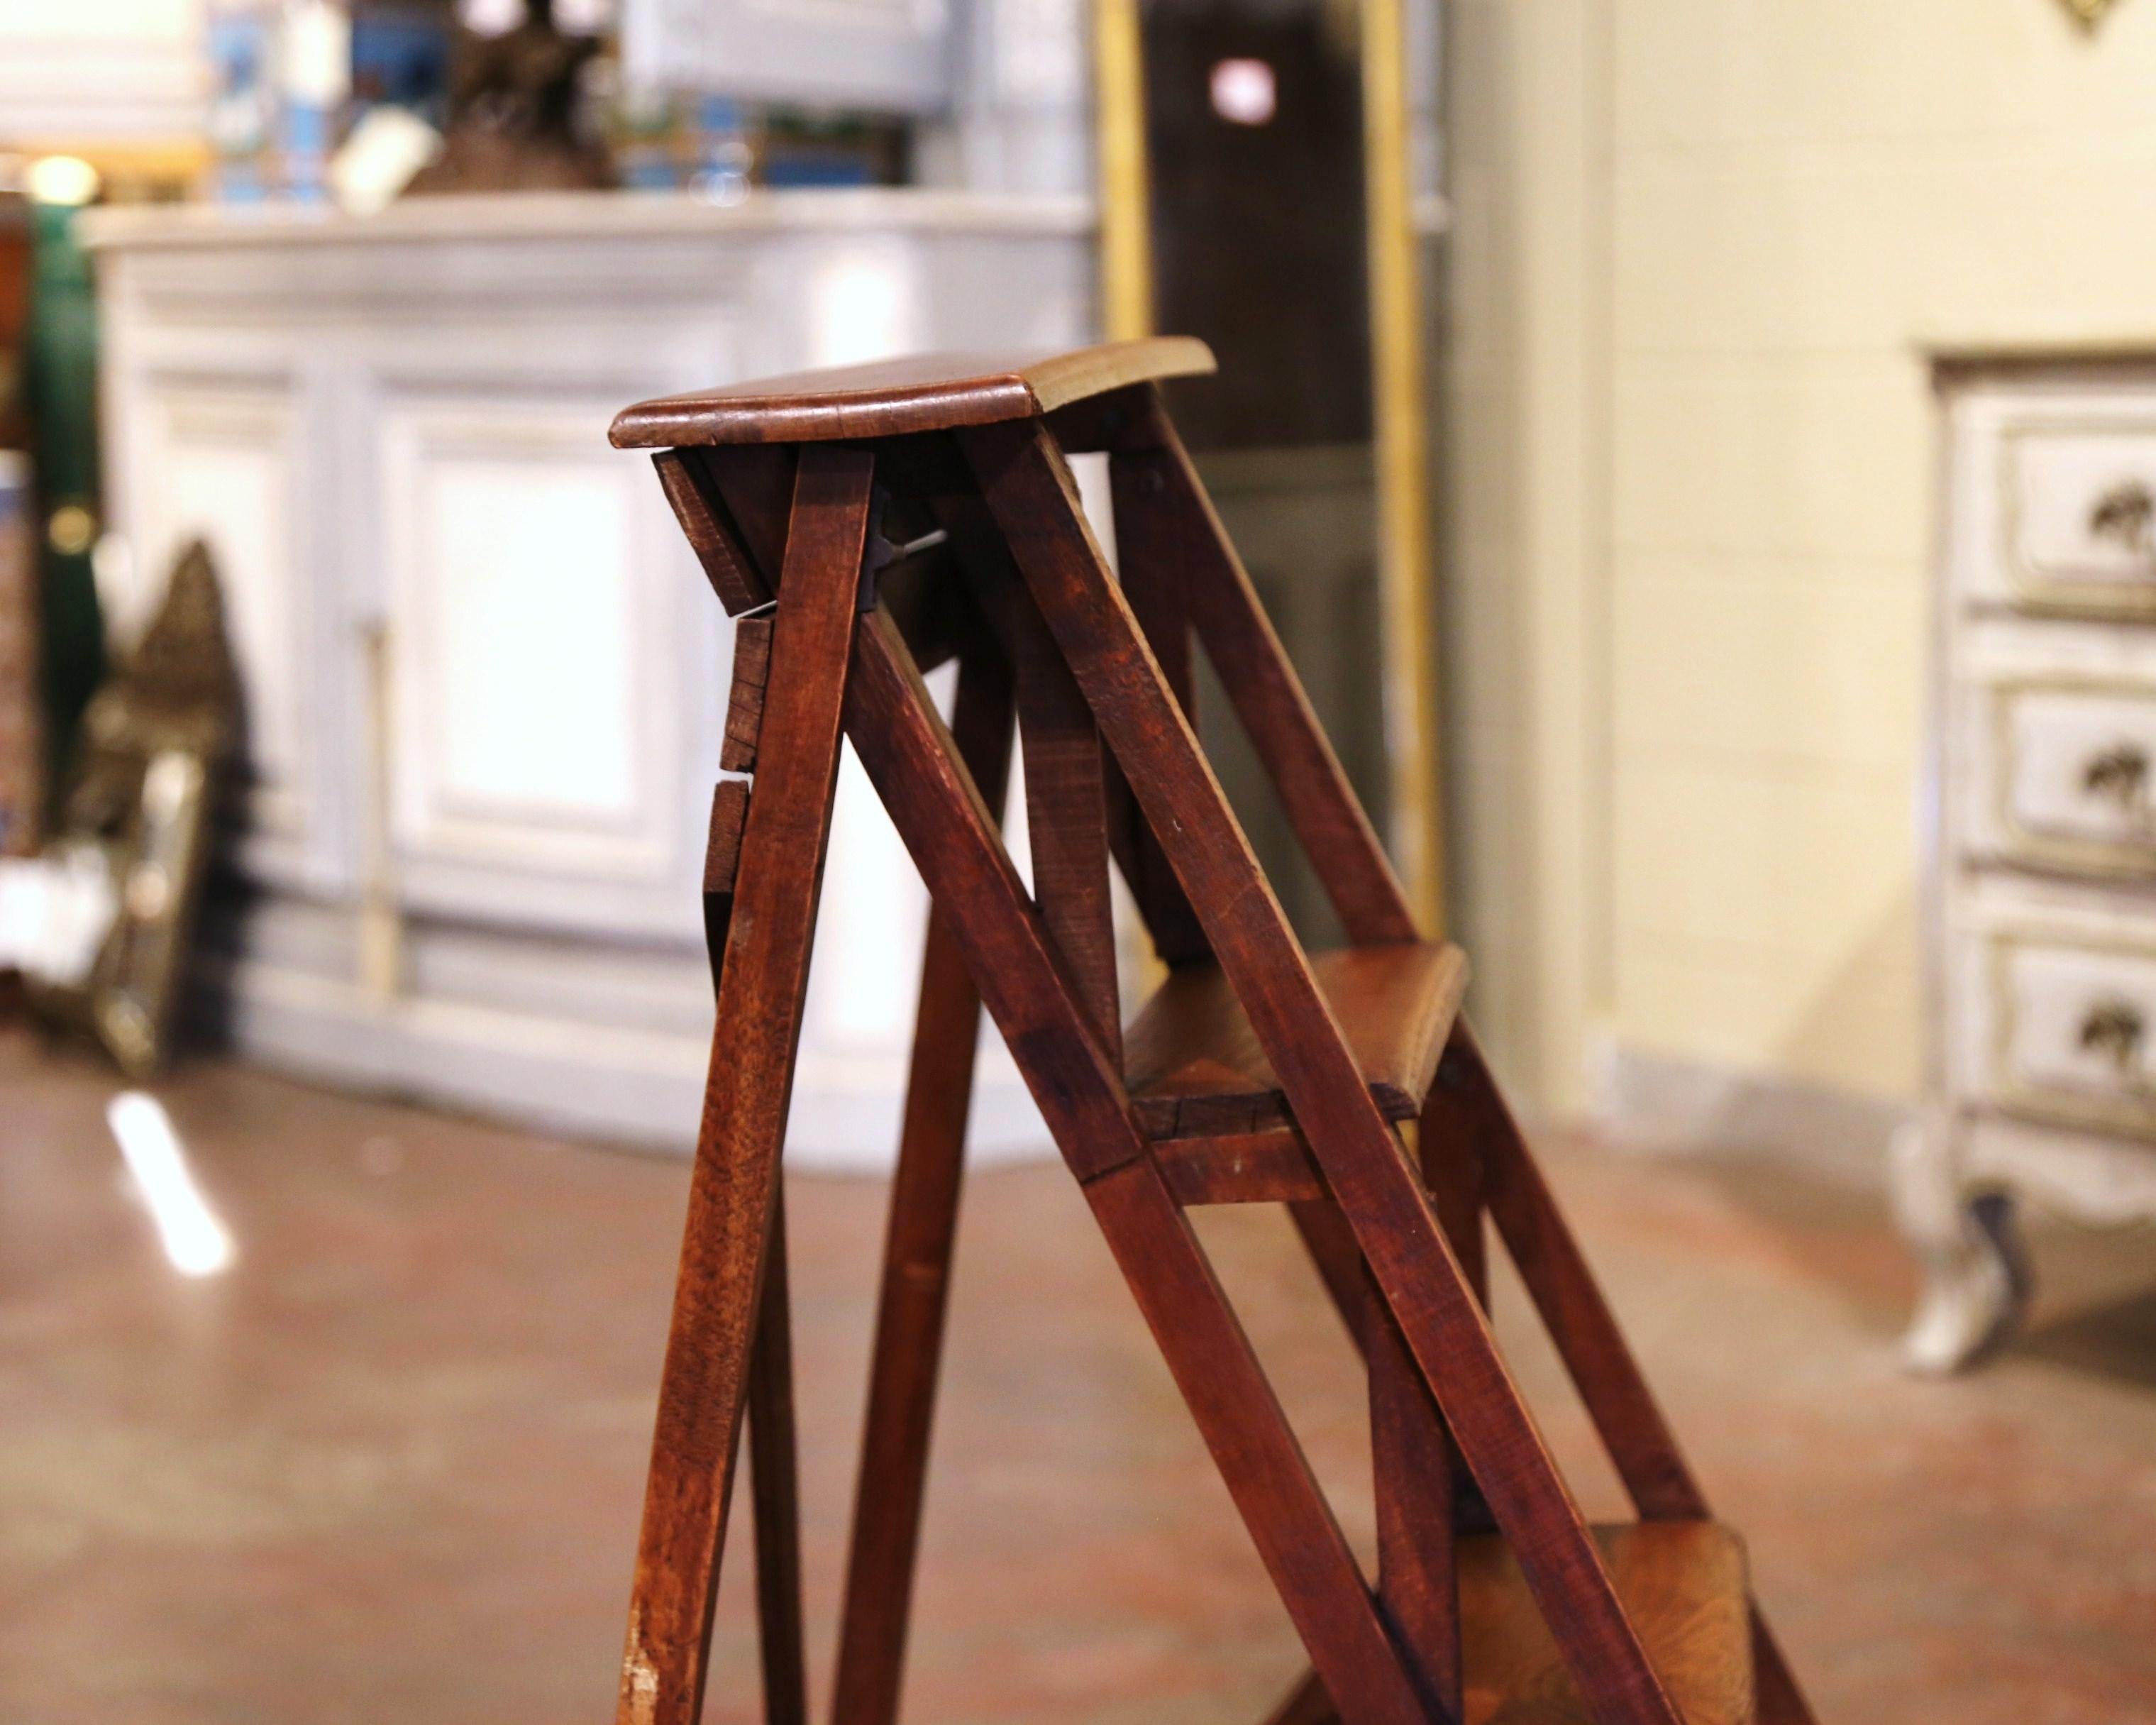 Crafted in Lyon, France circa 1880 and made of walnut, the stairs features four graduated steps to one side and connected to the opposing support with a wooden and metal action folding mechanism. Practical and useful, the ladder can folded and put